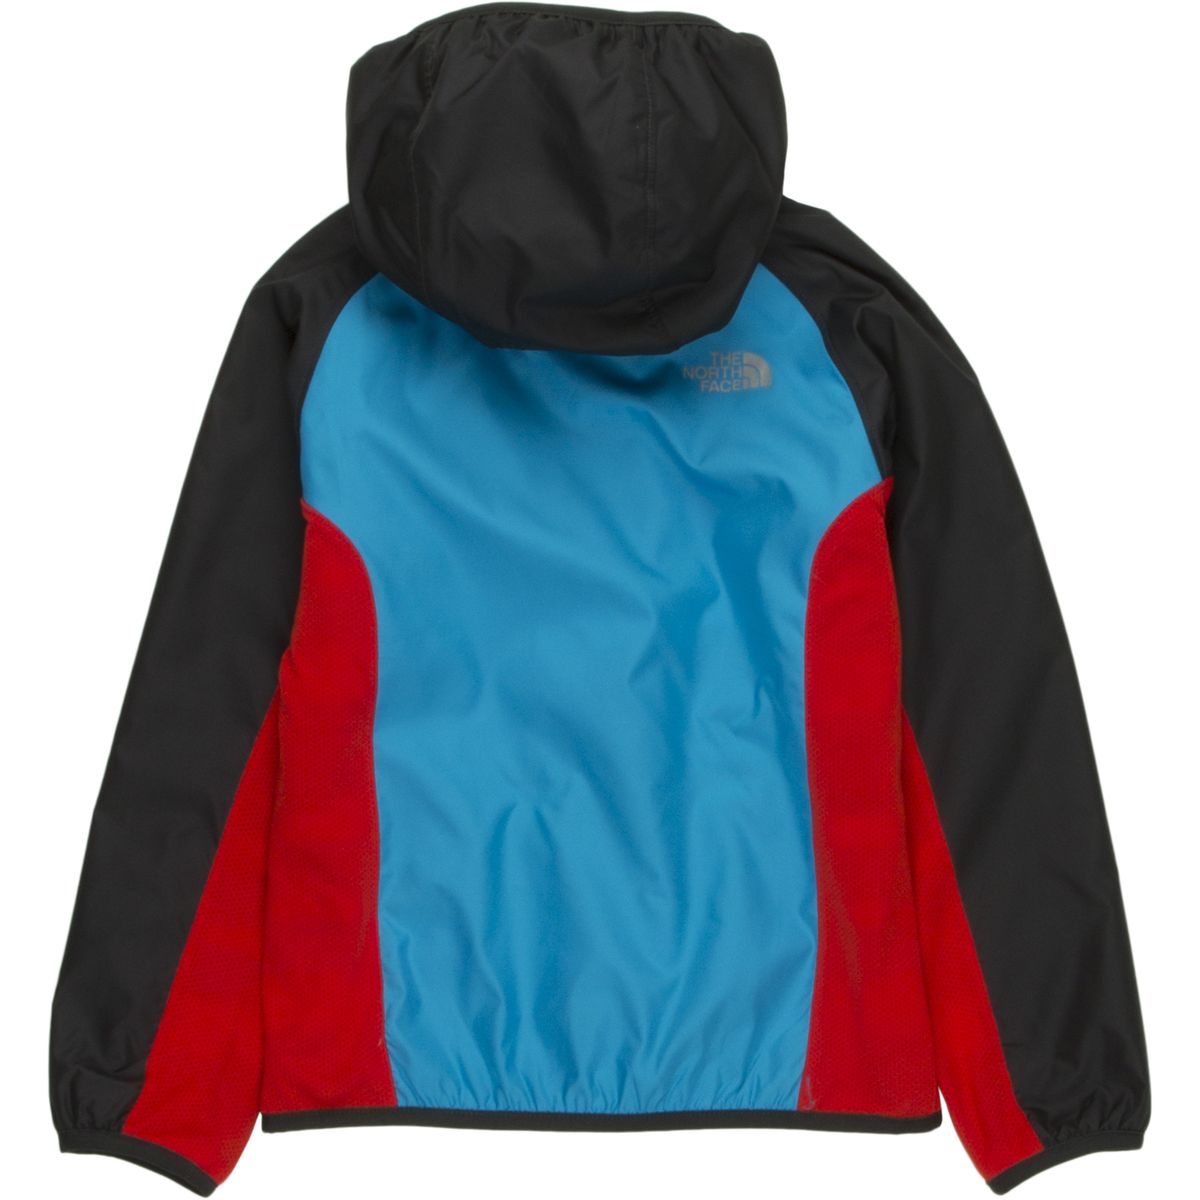 The North Face Grizzly Peak Reversible Wind Jacket - Toddler Boys' - Kids